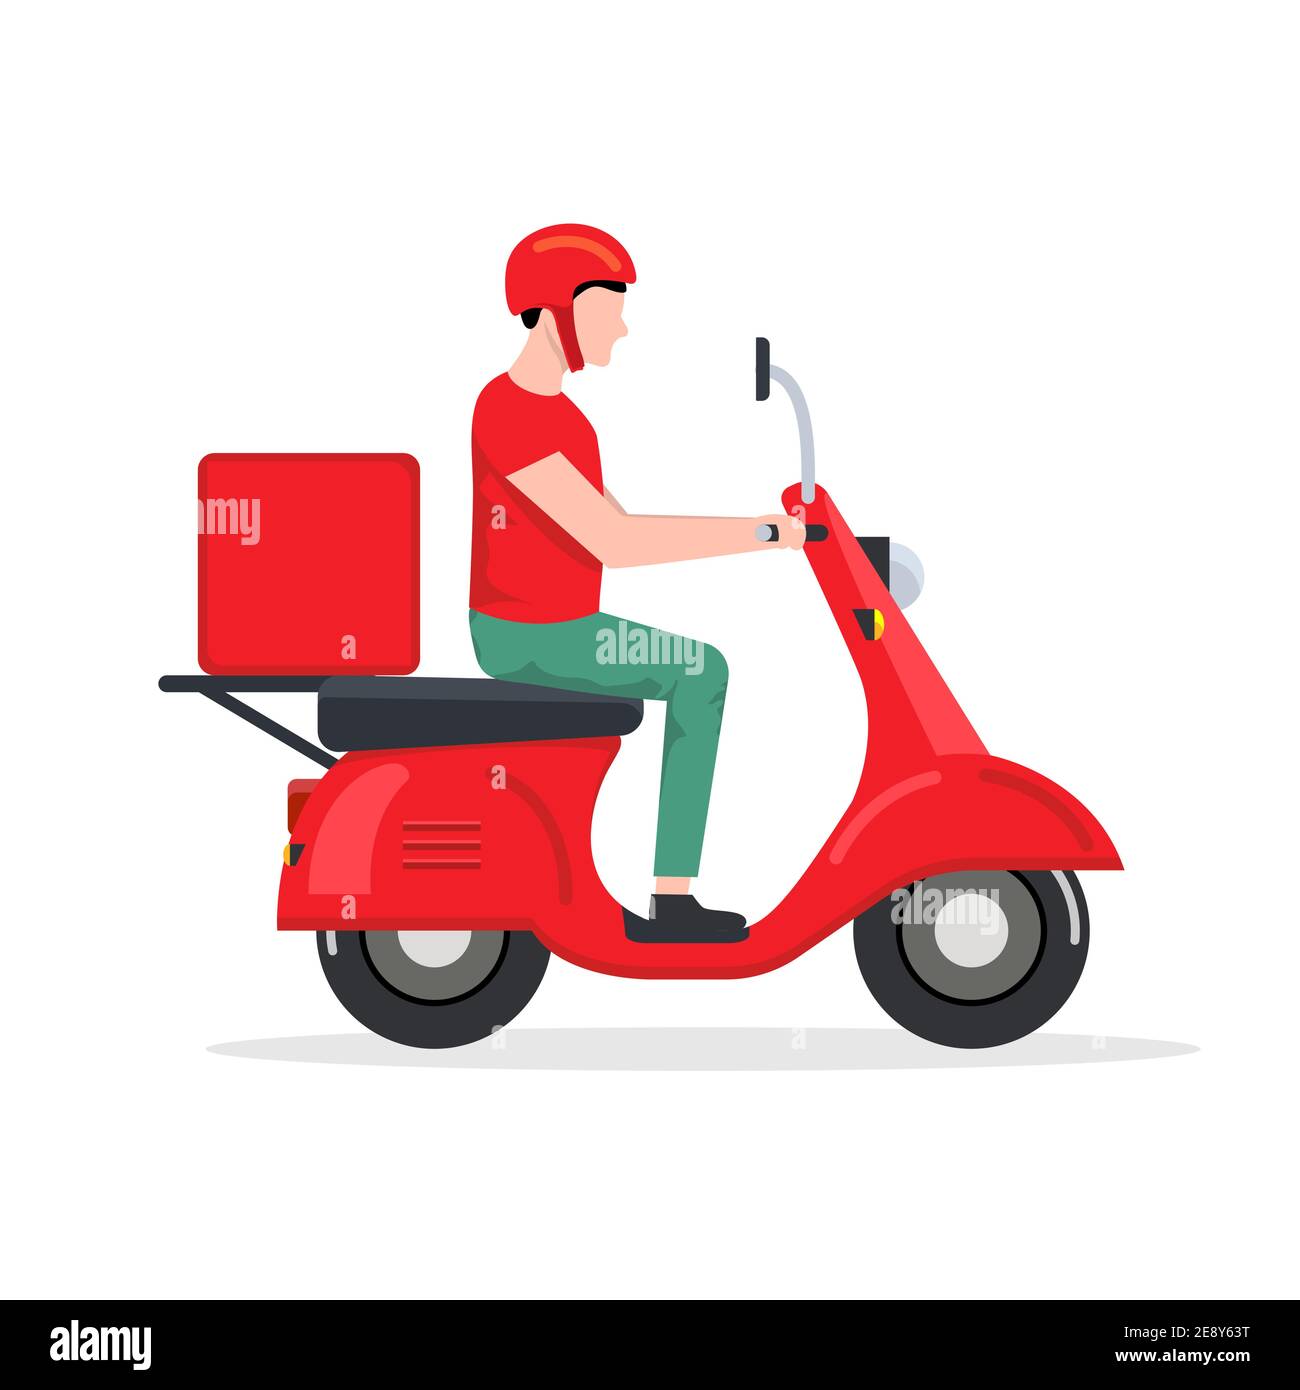 Delivery man motorbike logo icon. Scooter bike vector icon express